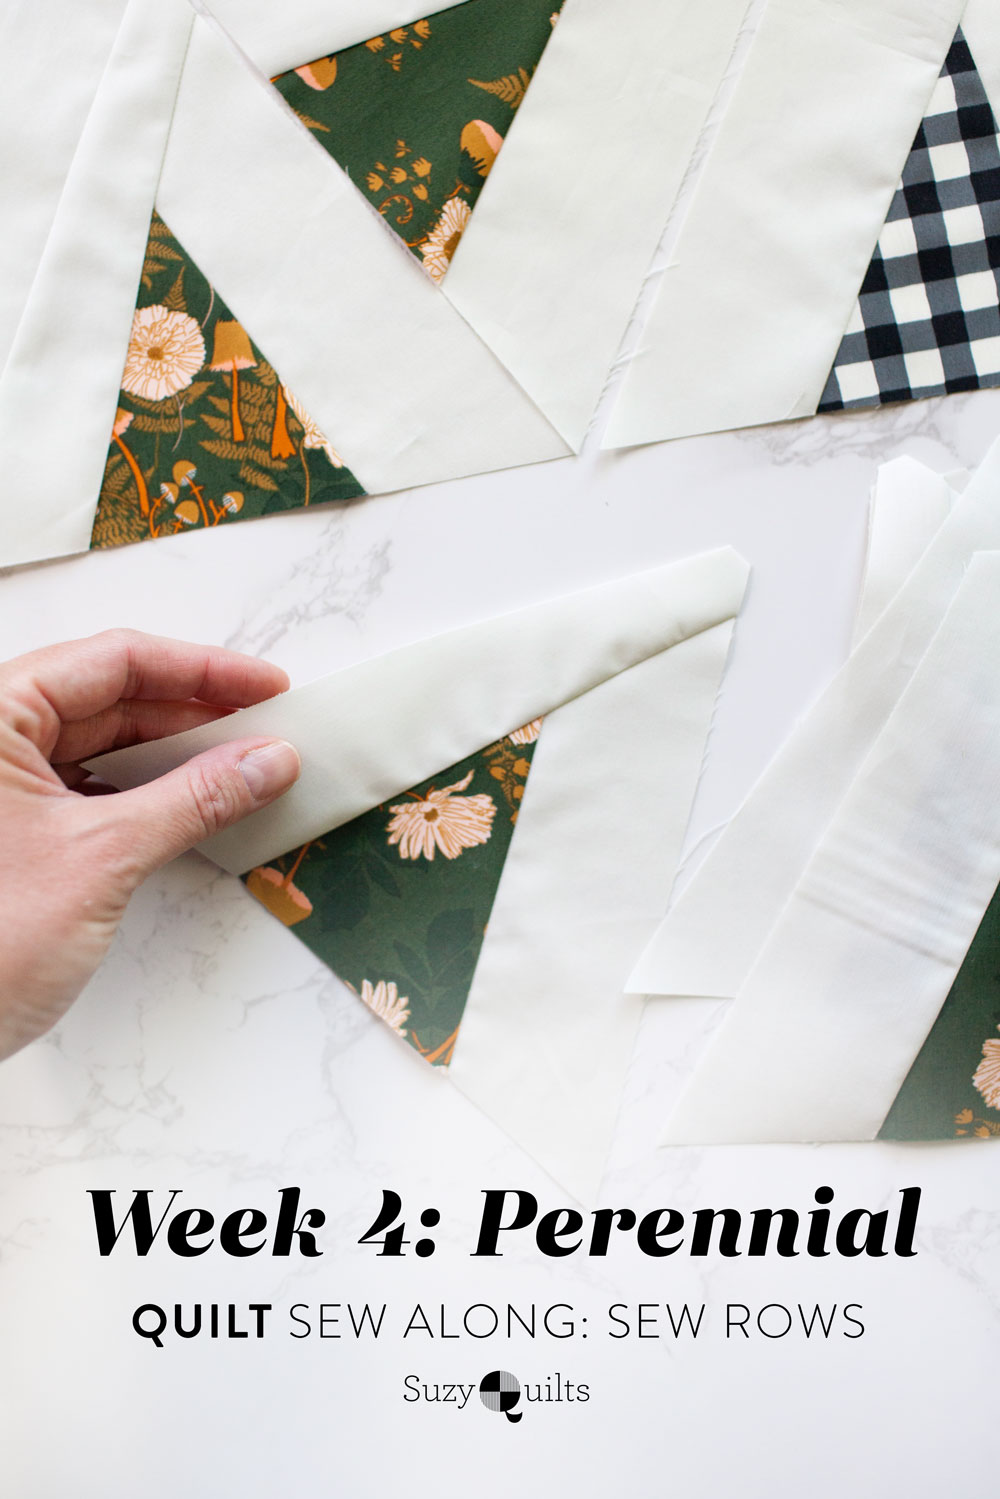 In week 4 of the Perennial quilt sew along we sew our triangles into rows. Check out these tips and video tutorials!